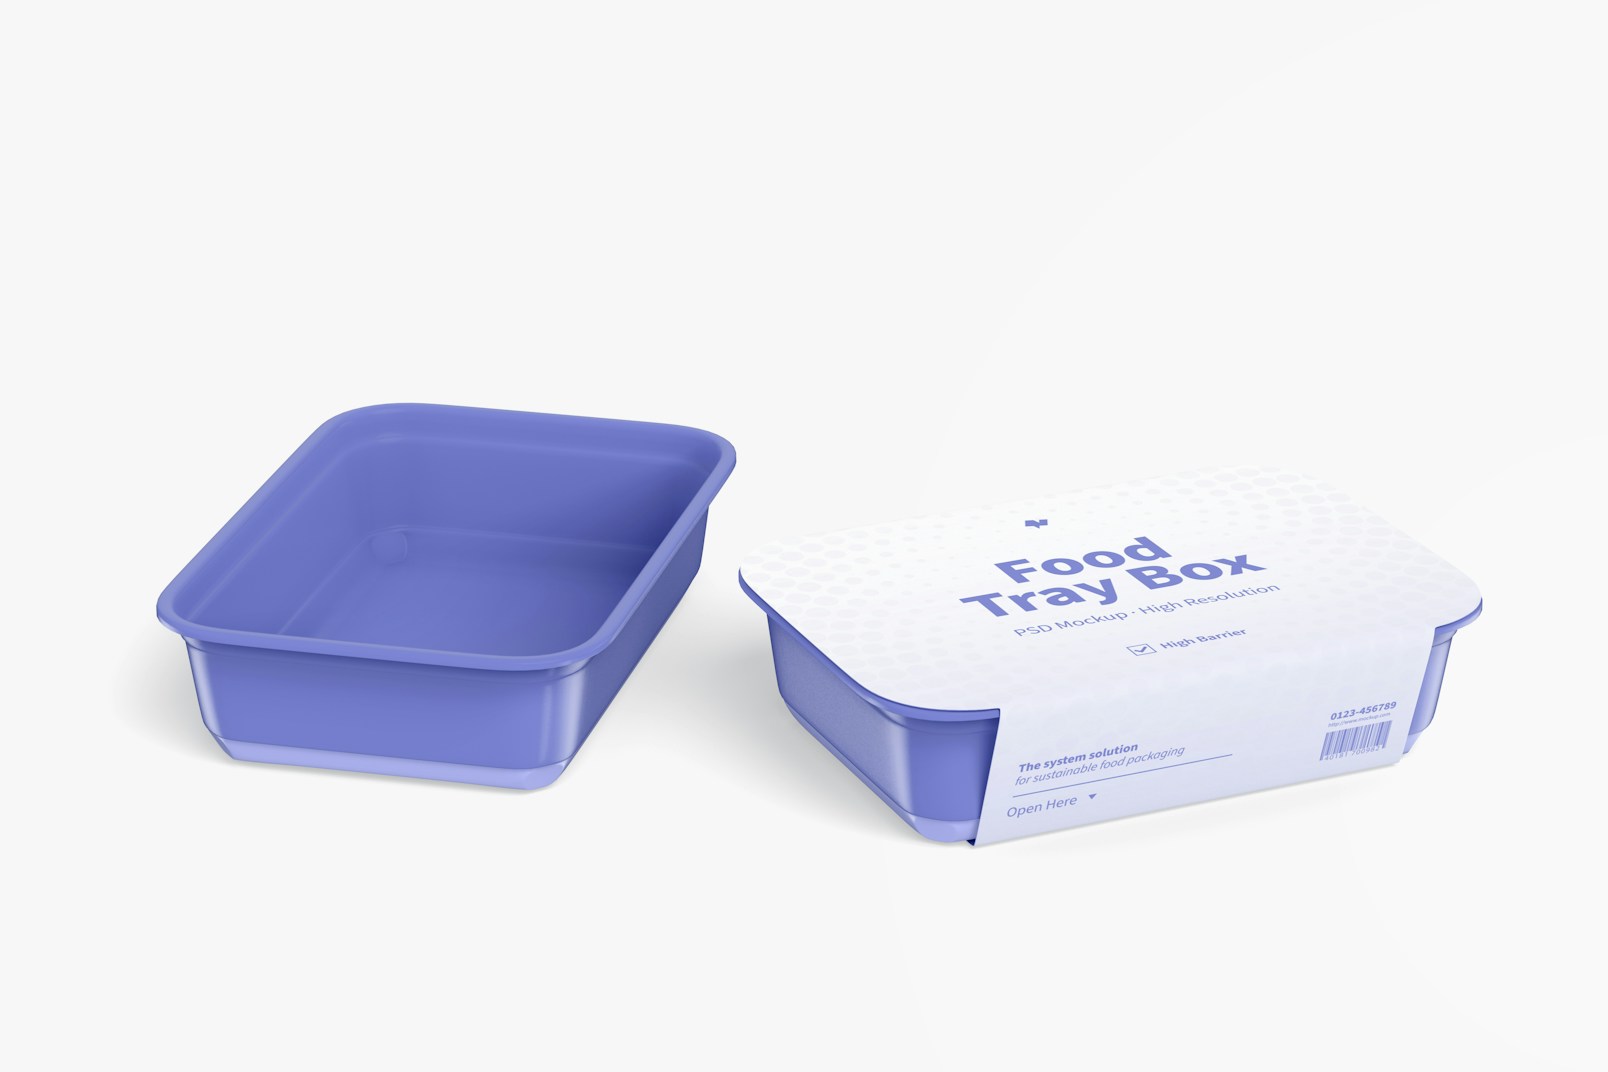 Food Tray Boxes With Label Mockup